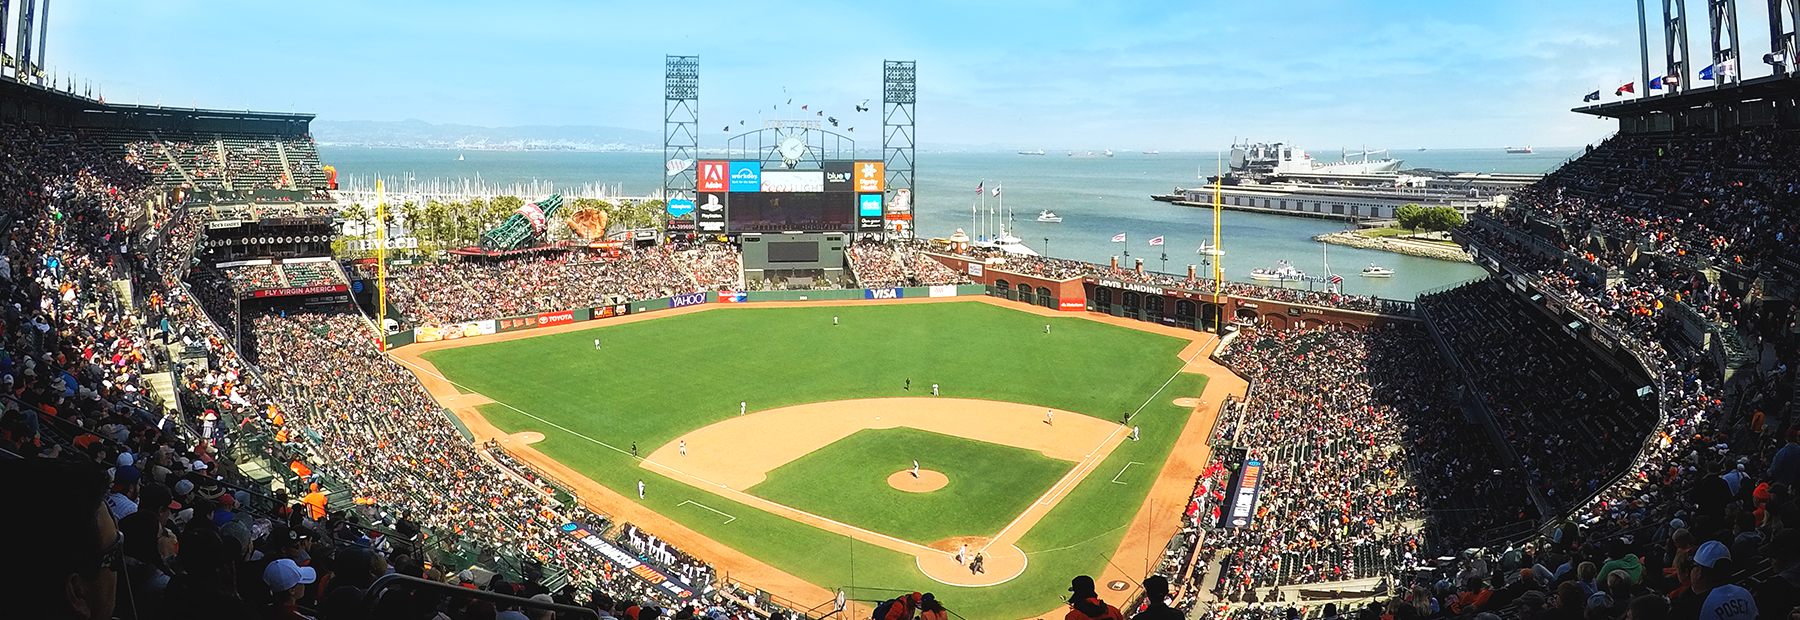 SF Giants Home Schedule and Seating | Gametime